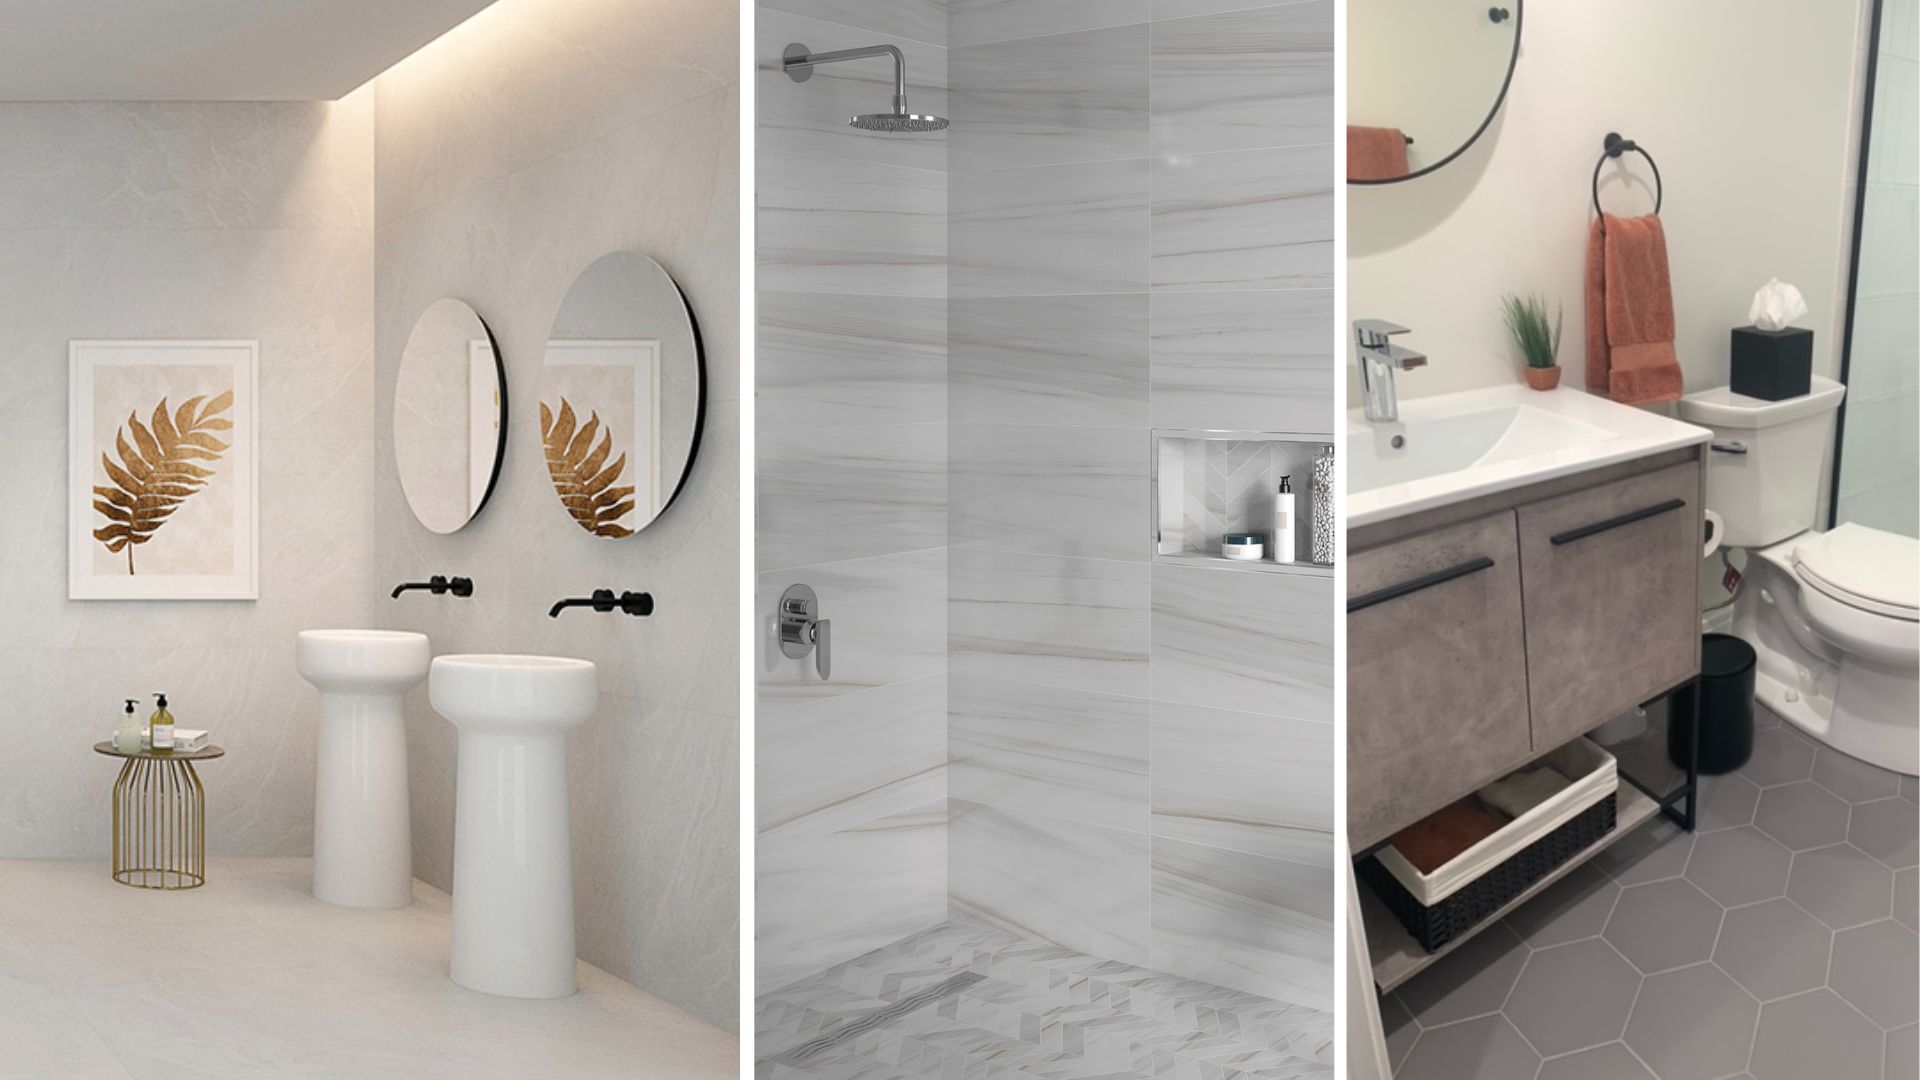 three examples of bathroom installations including stone, marble, and solid visuals.